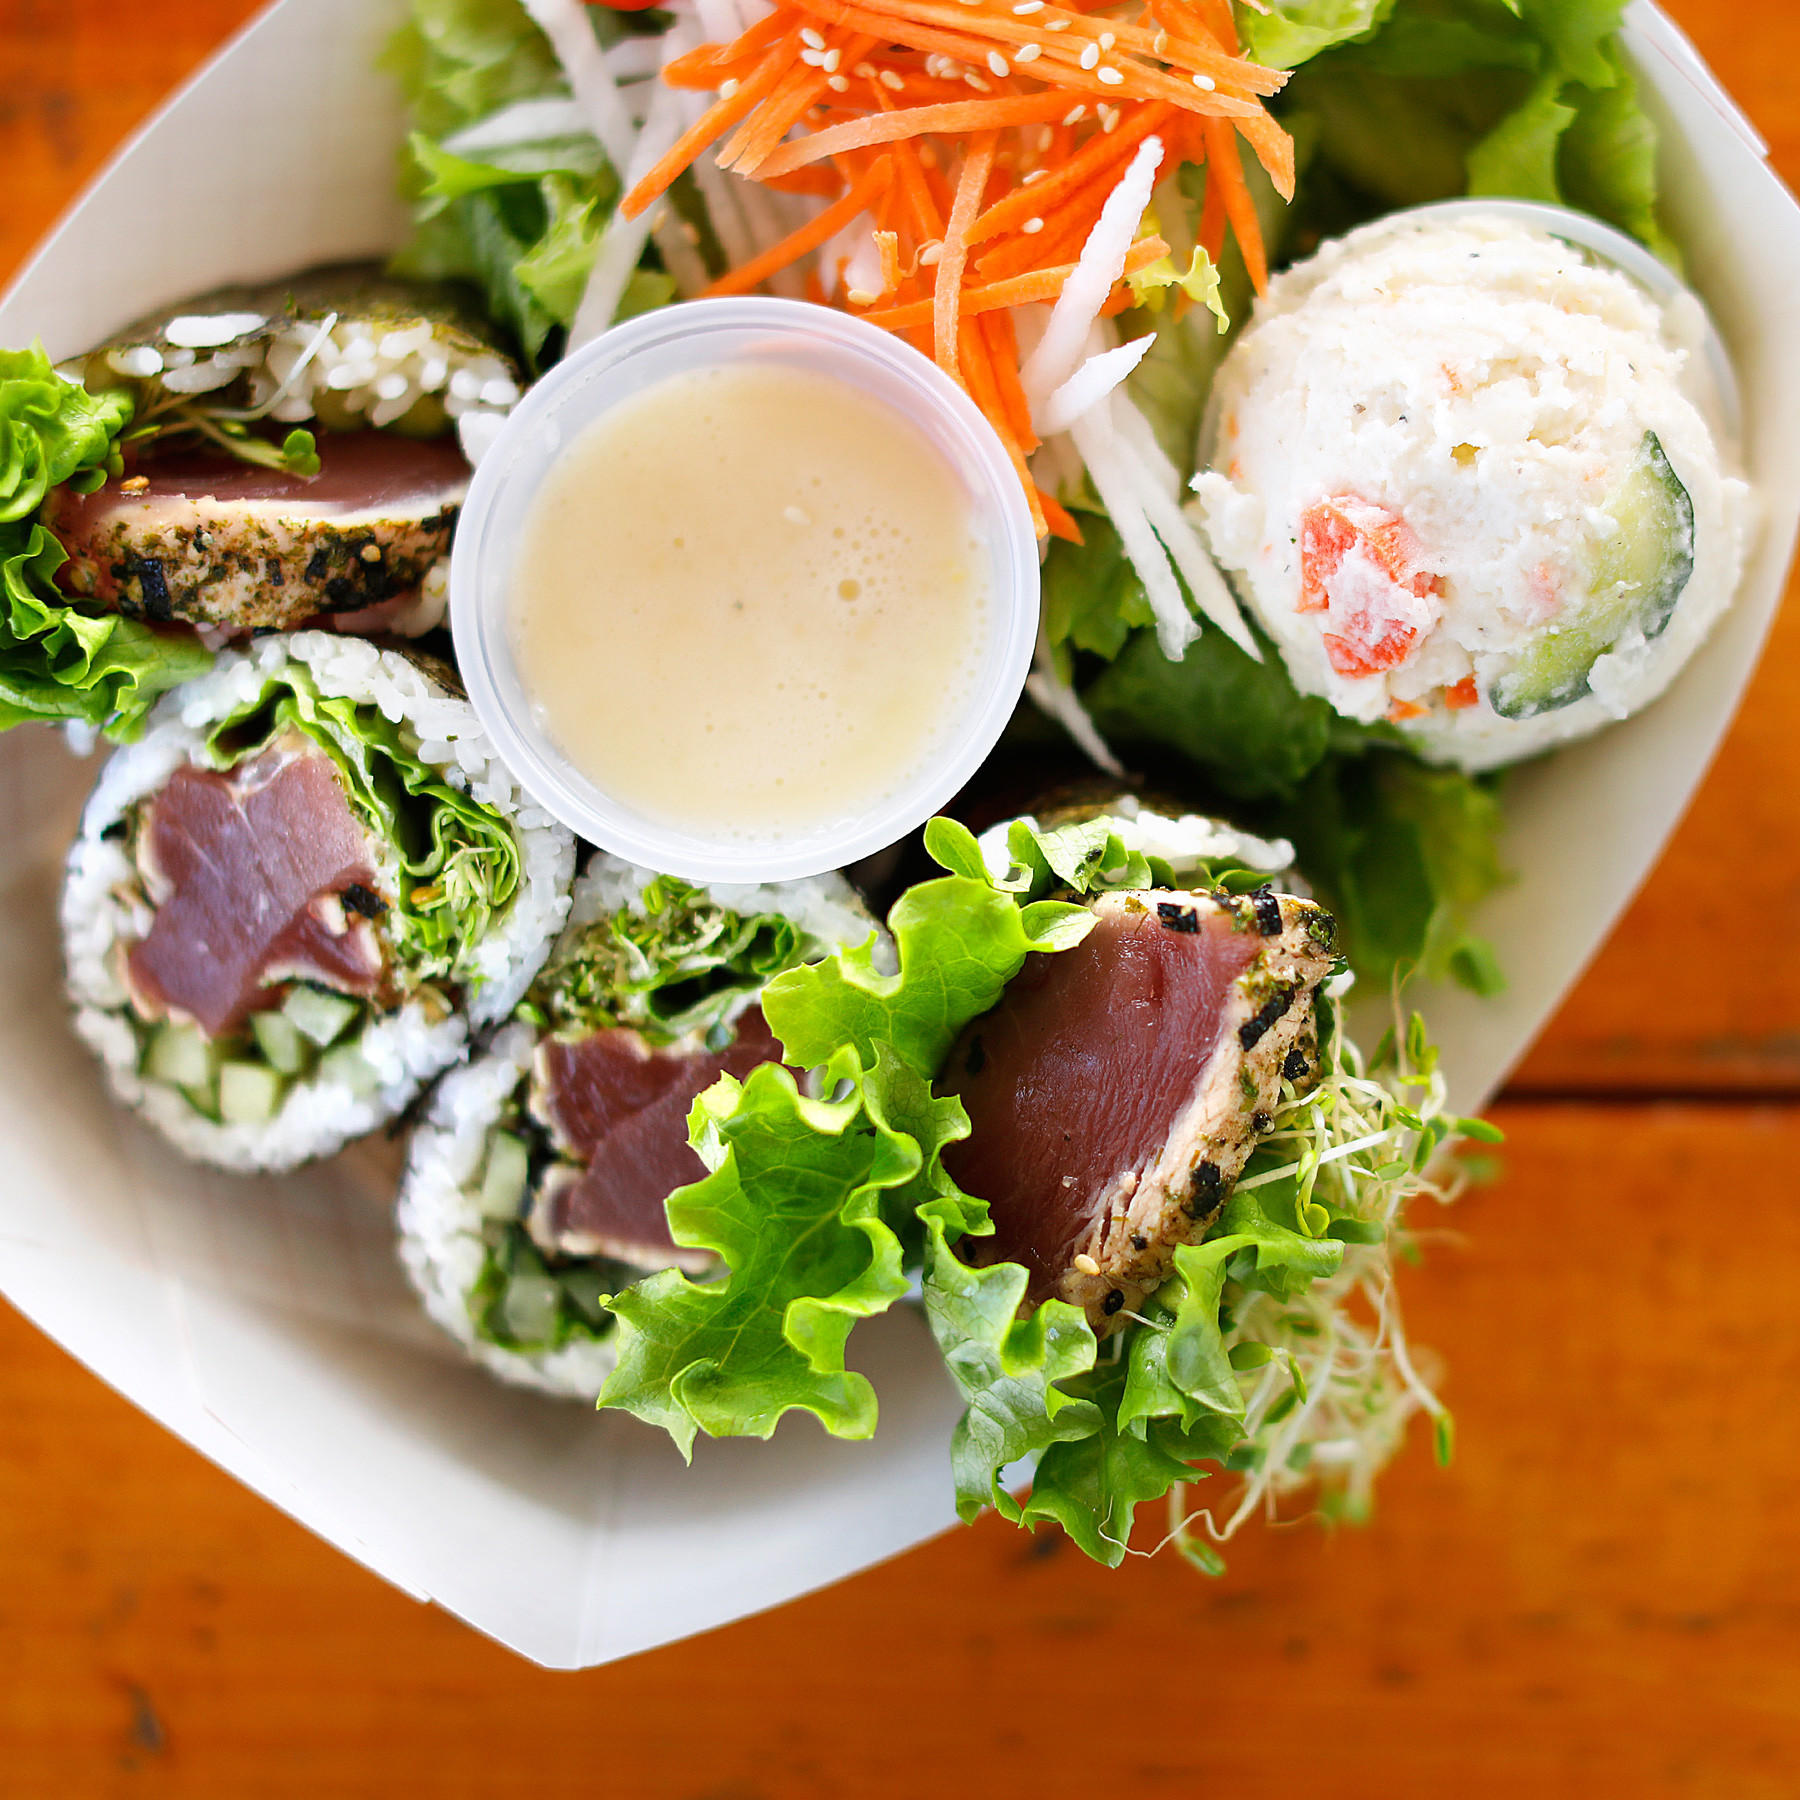 On Kauai, where to eat for cheap: 20 places to chow down for $20 - Los